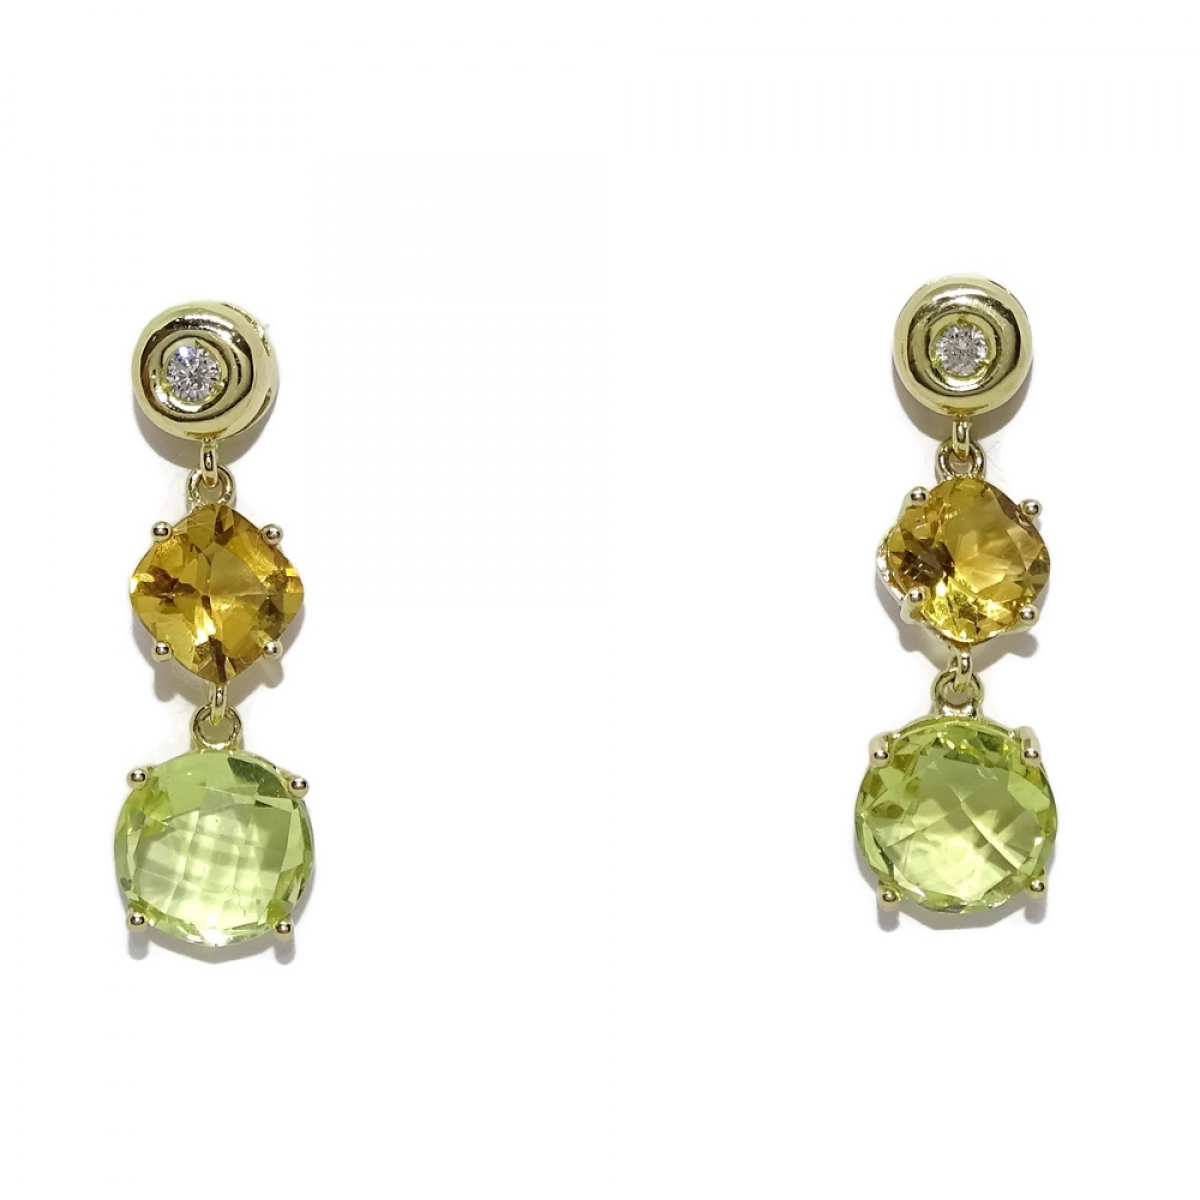 OUTSTANDING UNIQUE YELLOW GOLD 0.10 CTS OF DIAMONDS AND FINE STONES, CITRINE AND QUARTZ LIMON NEVER SAY NEVER